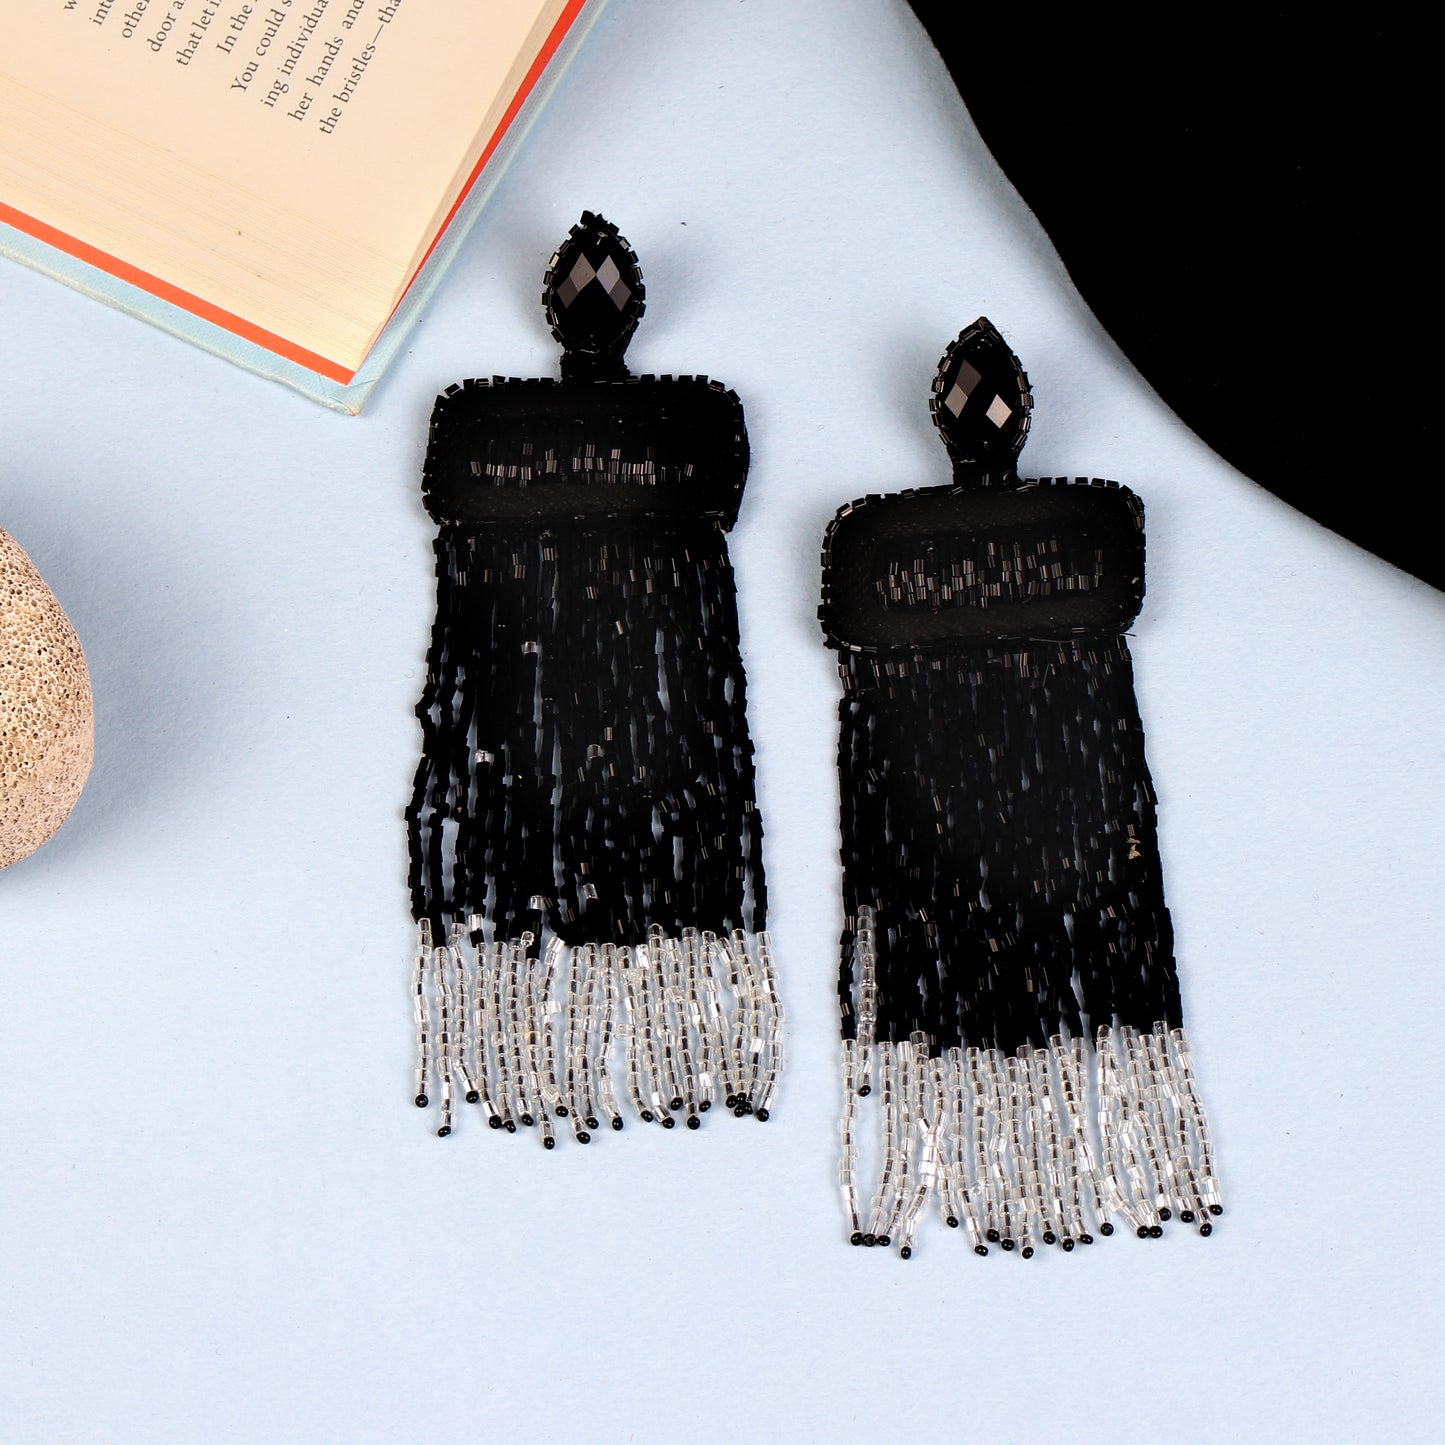 The Jelly Frills Beaded Earrings in Shades of Black